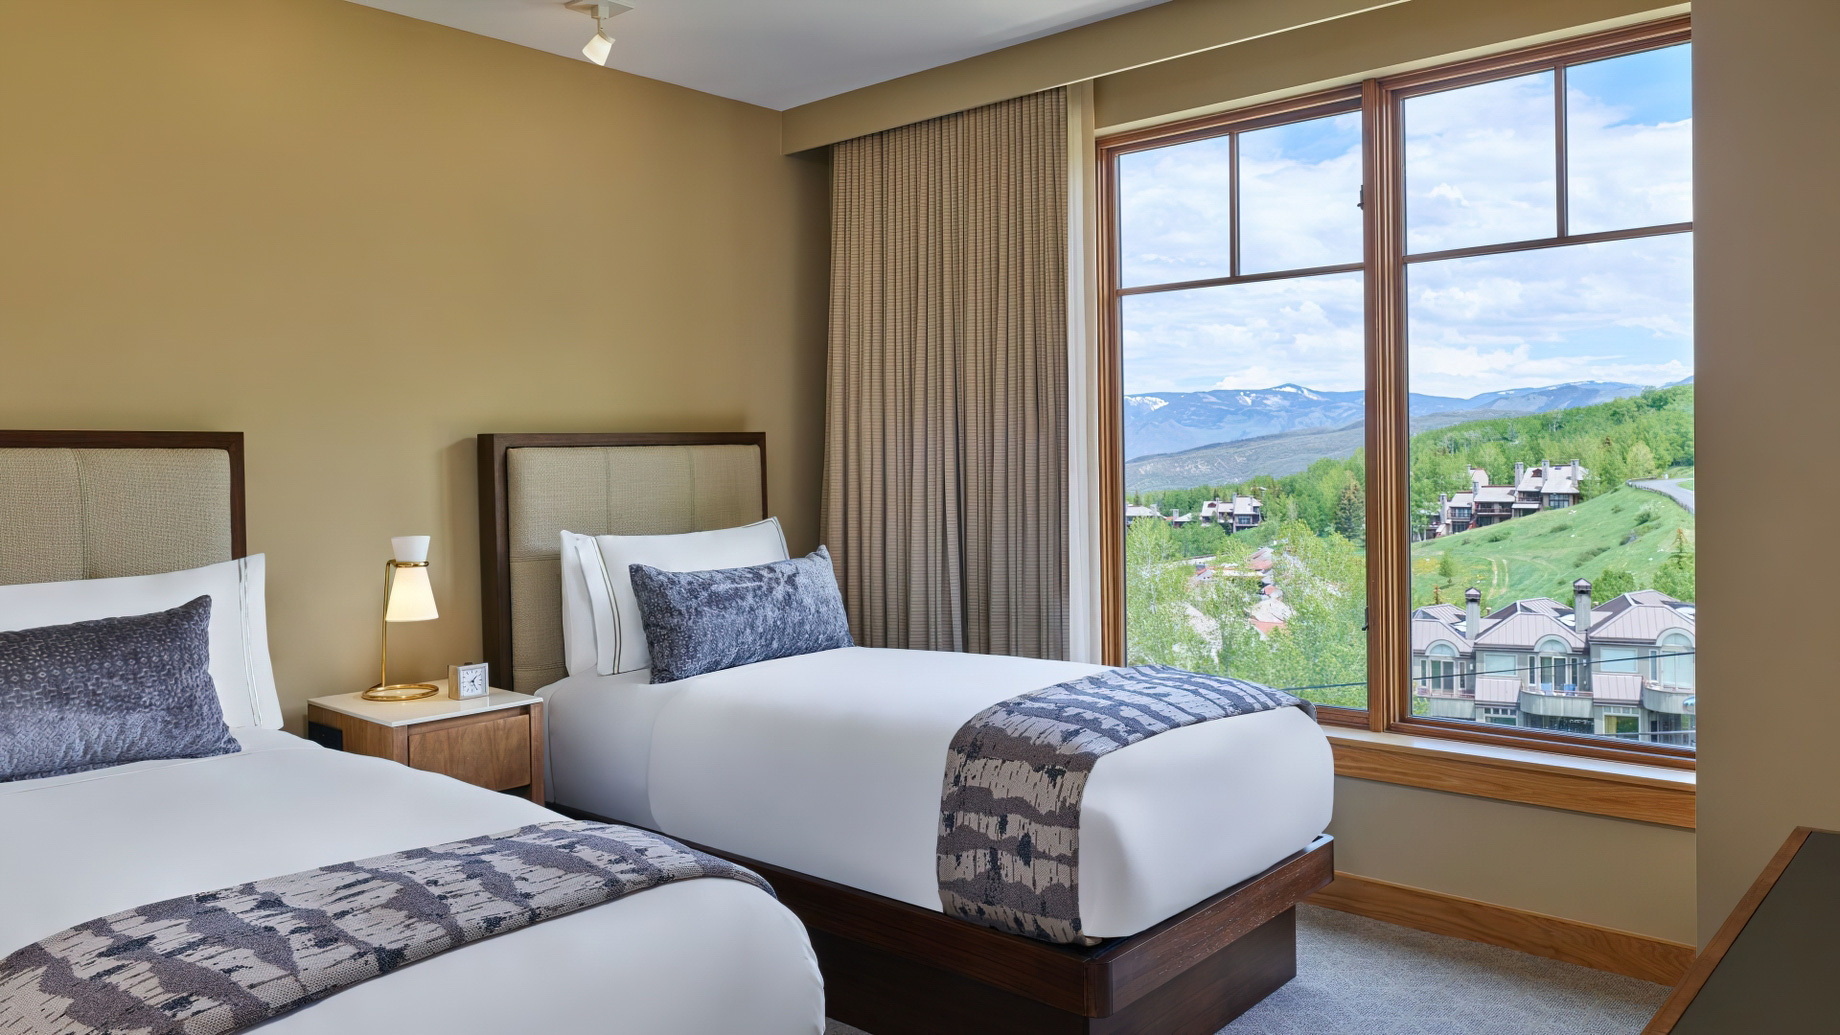 Viceroy Snowmass Luxury Resort - Aspen Snowmass Village, CO, USA - Two Bedroom Residence Bedroom View